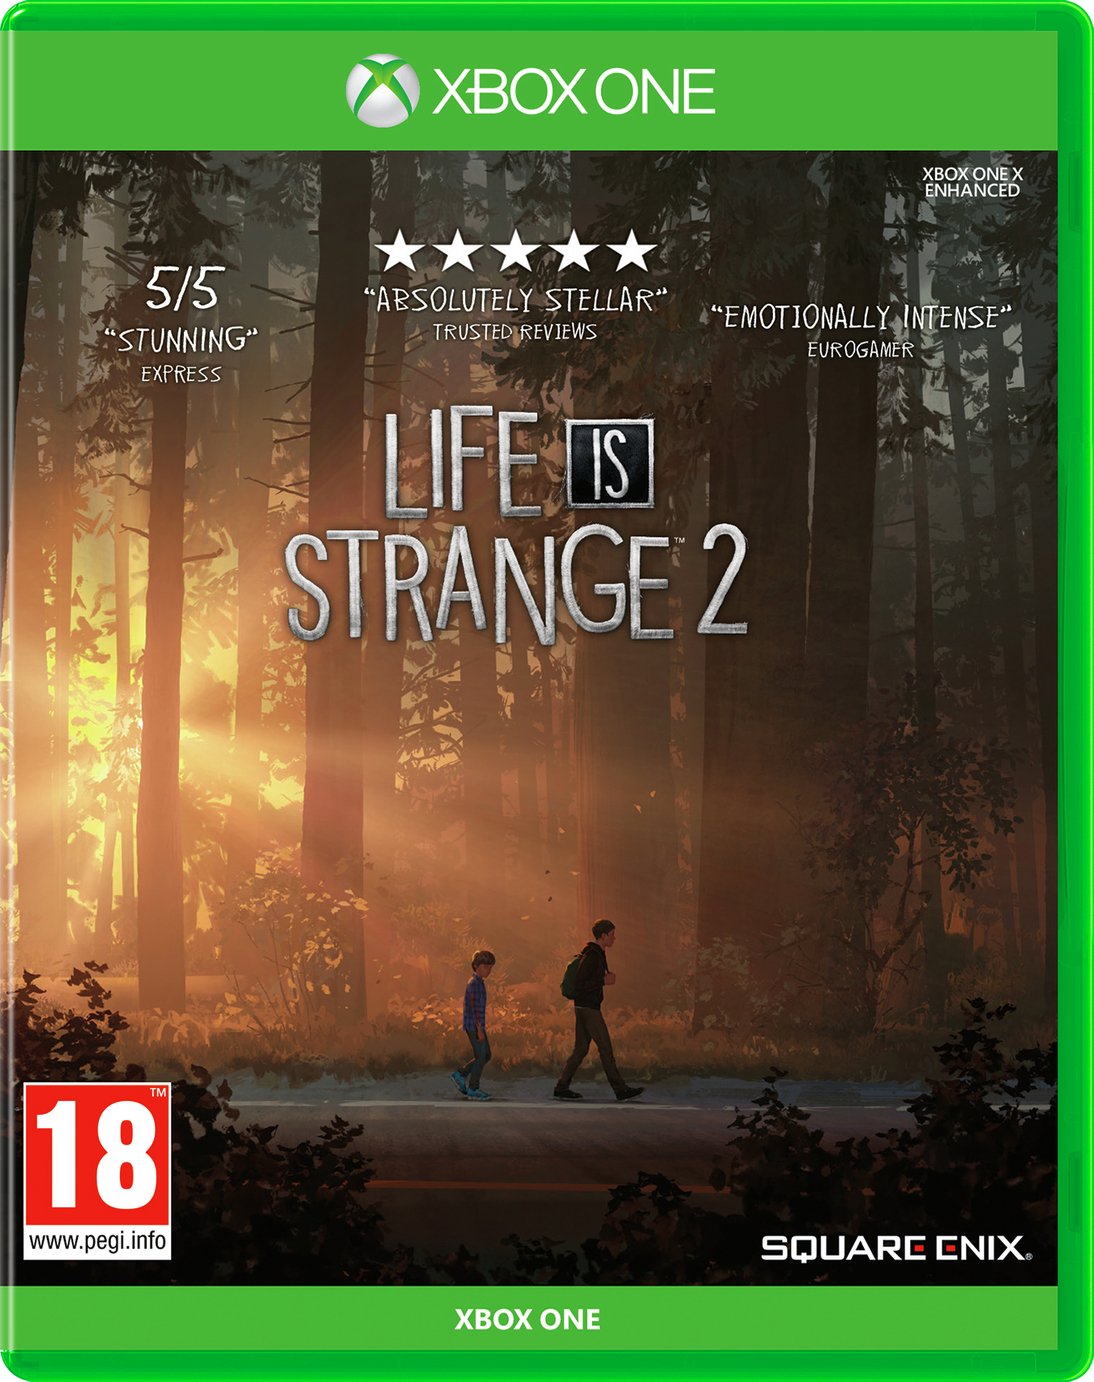 Life is Strange 2 Xbox One Pre-Order Game